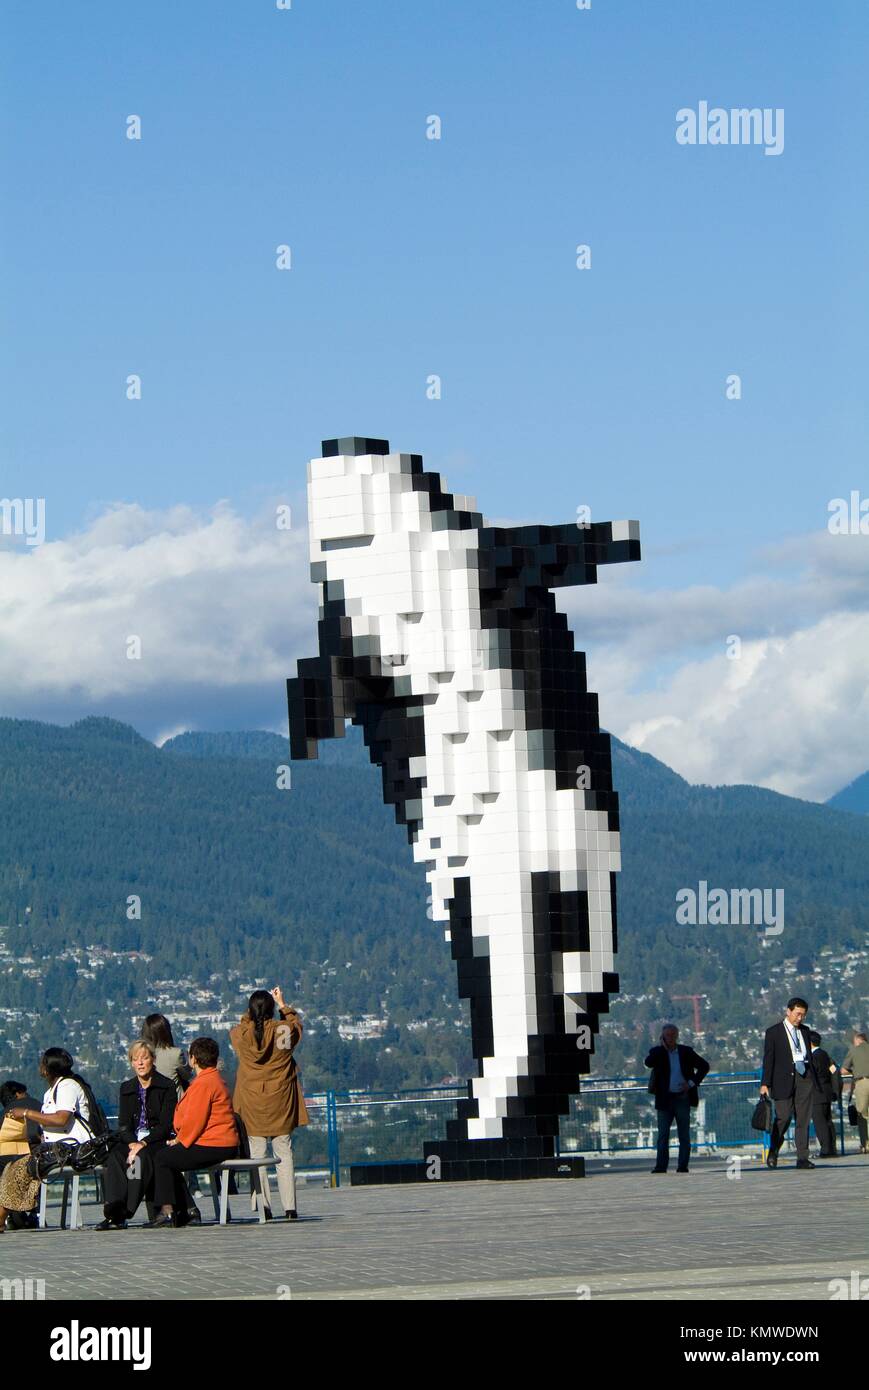 Digital Orca, sculpture by artist Douglas Coupland, at Jack Poole Plaza, next to the convention centre, downtown Vancouver, BC, Canada Stock Photo